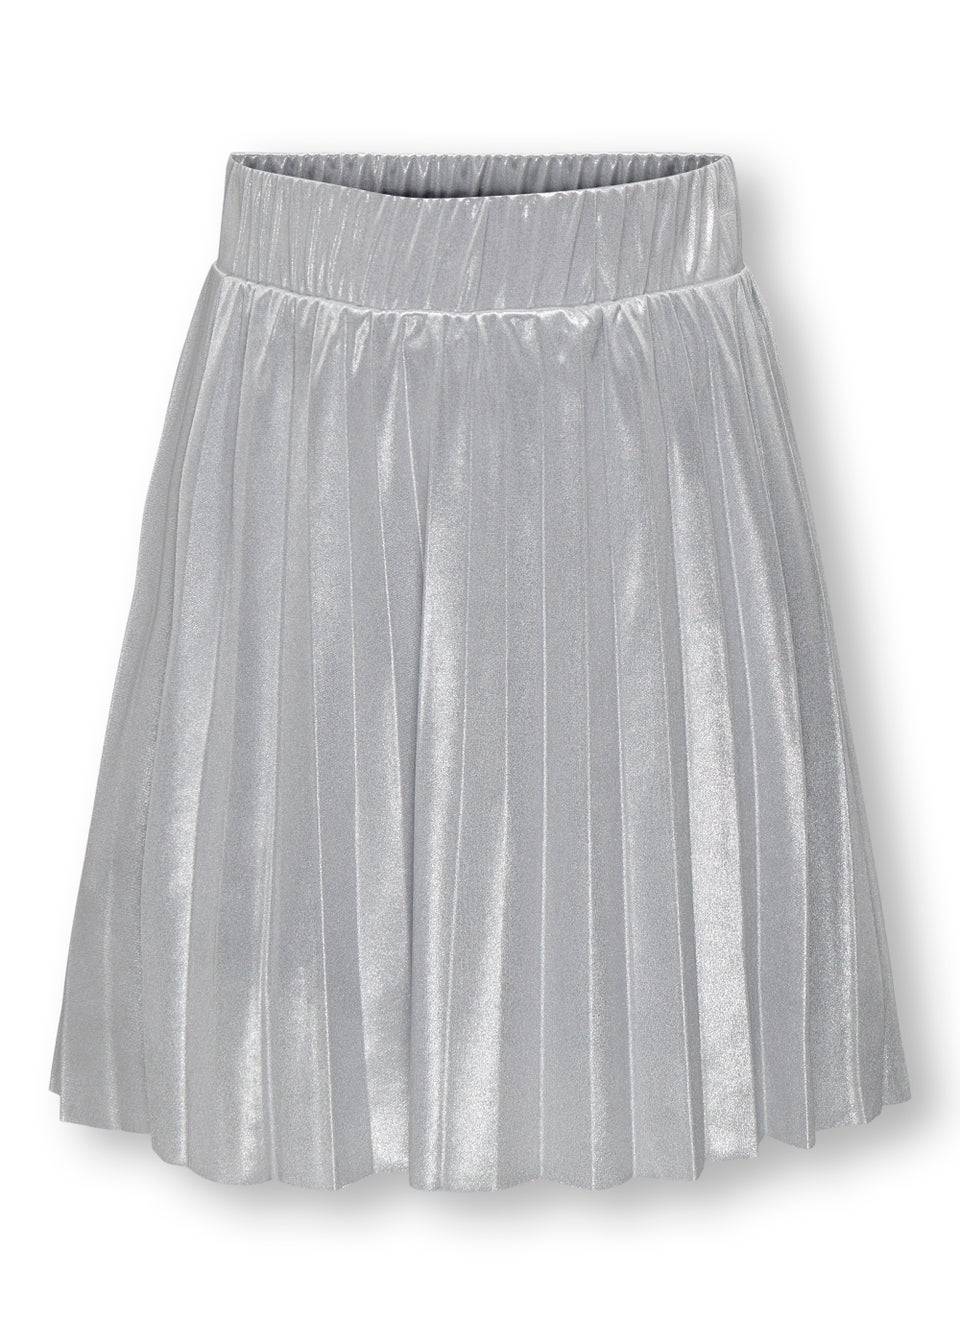 ONLY Kids Silver Pleated Skirt (5-14yrs)